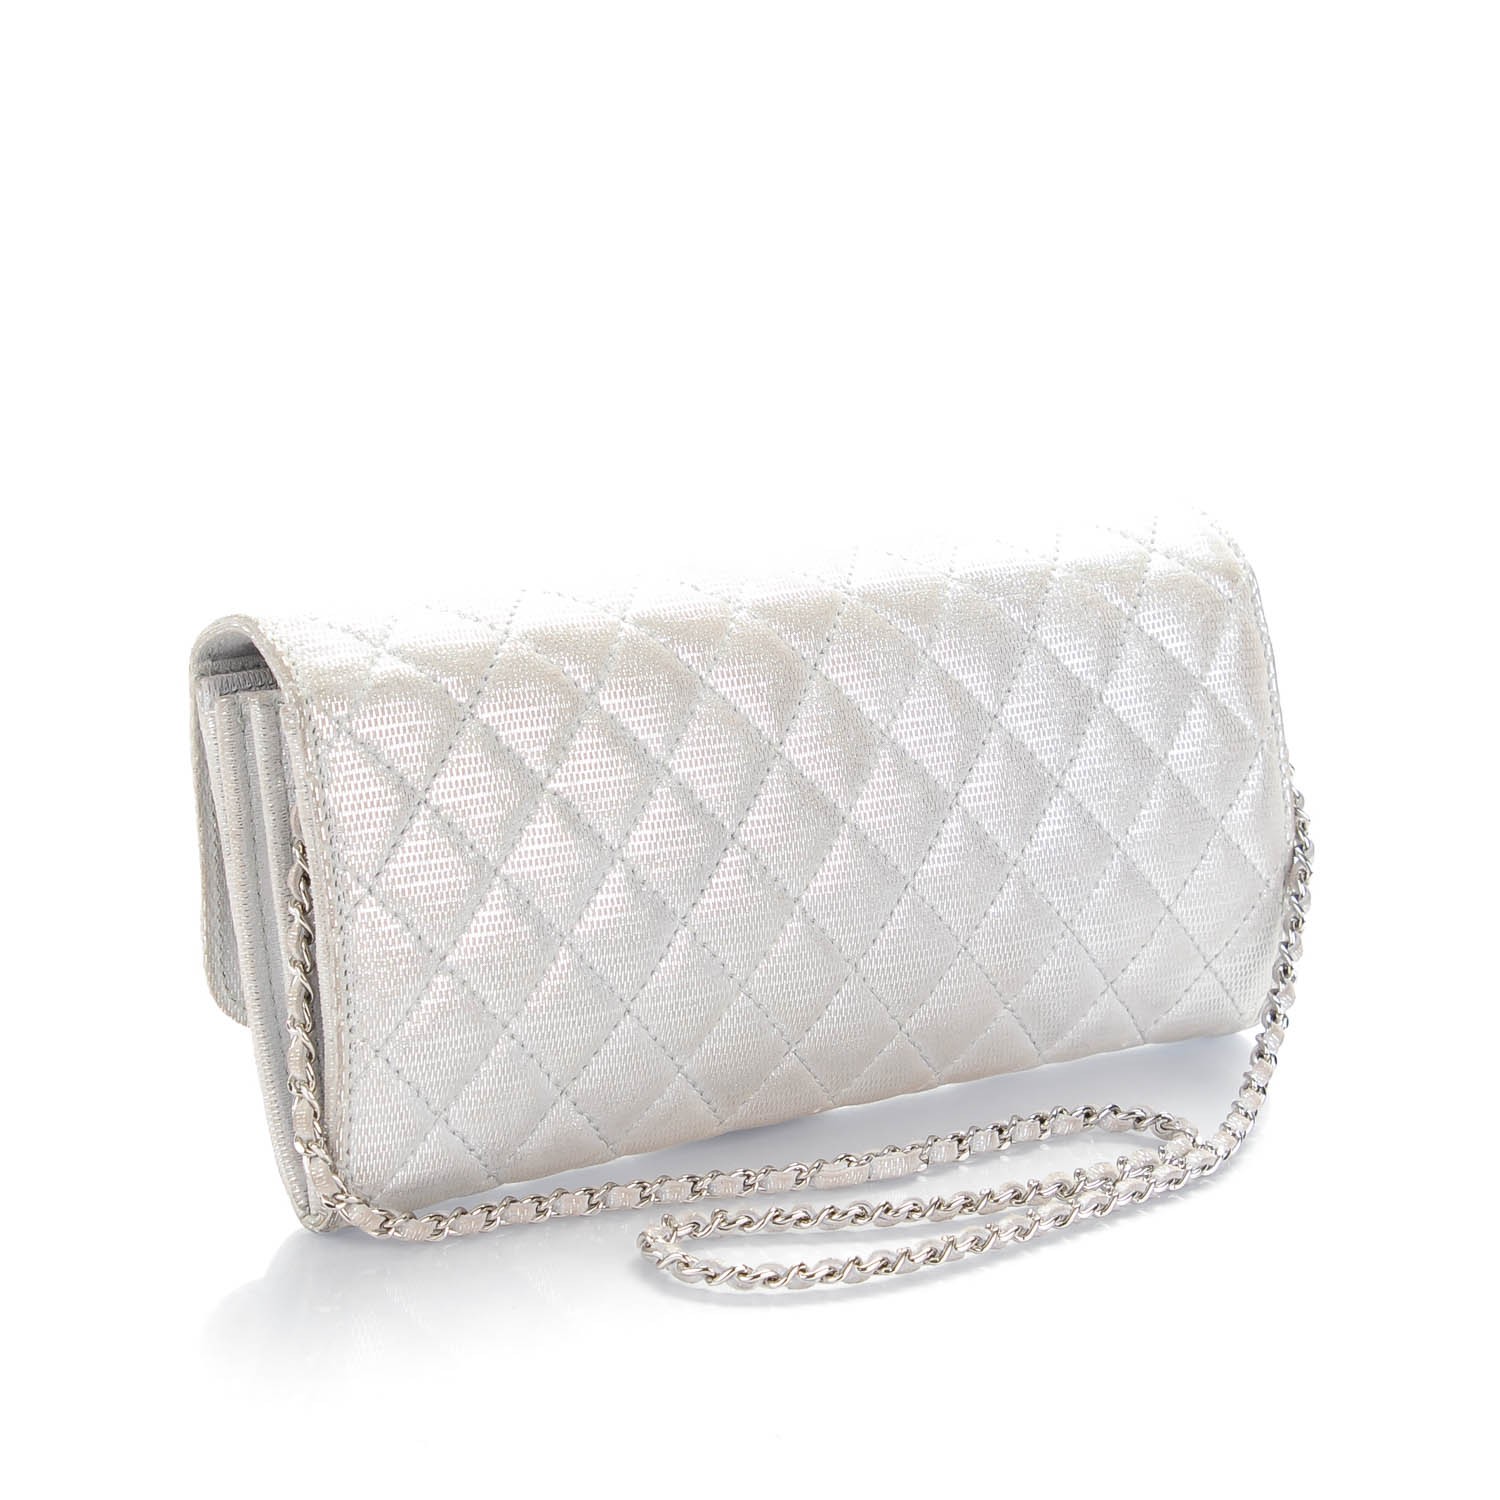 CHANEL Metallic Suede Quilted East West Flap Clutch Silver 142884